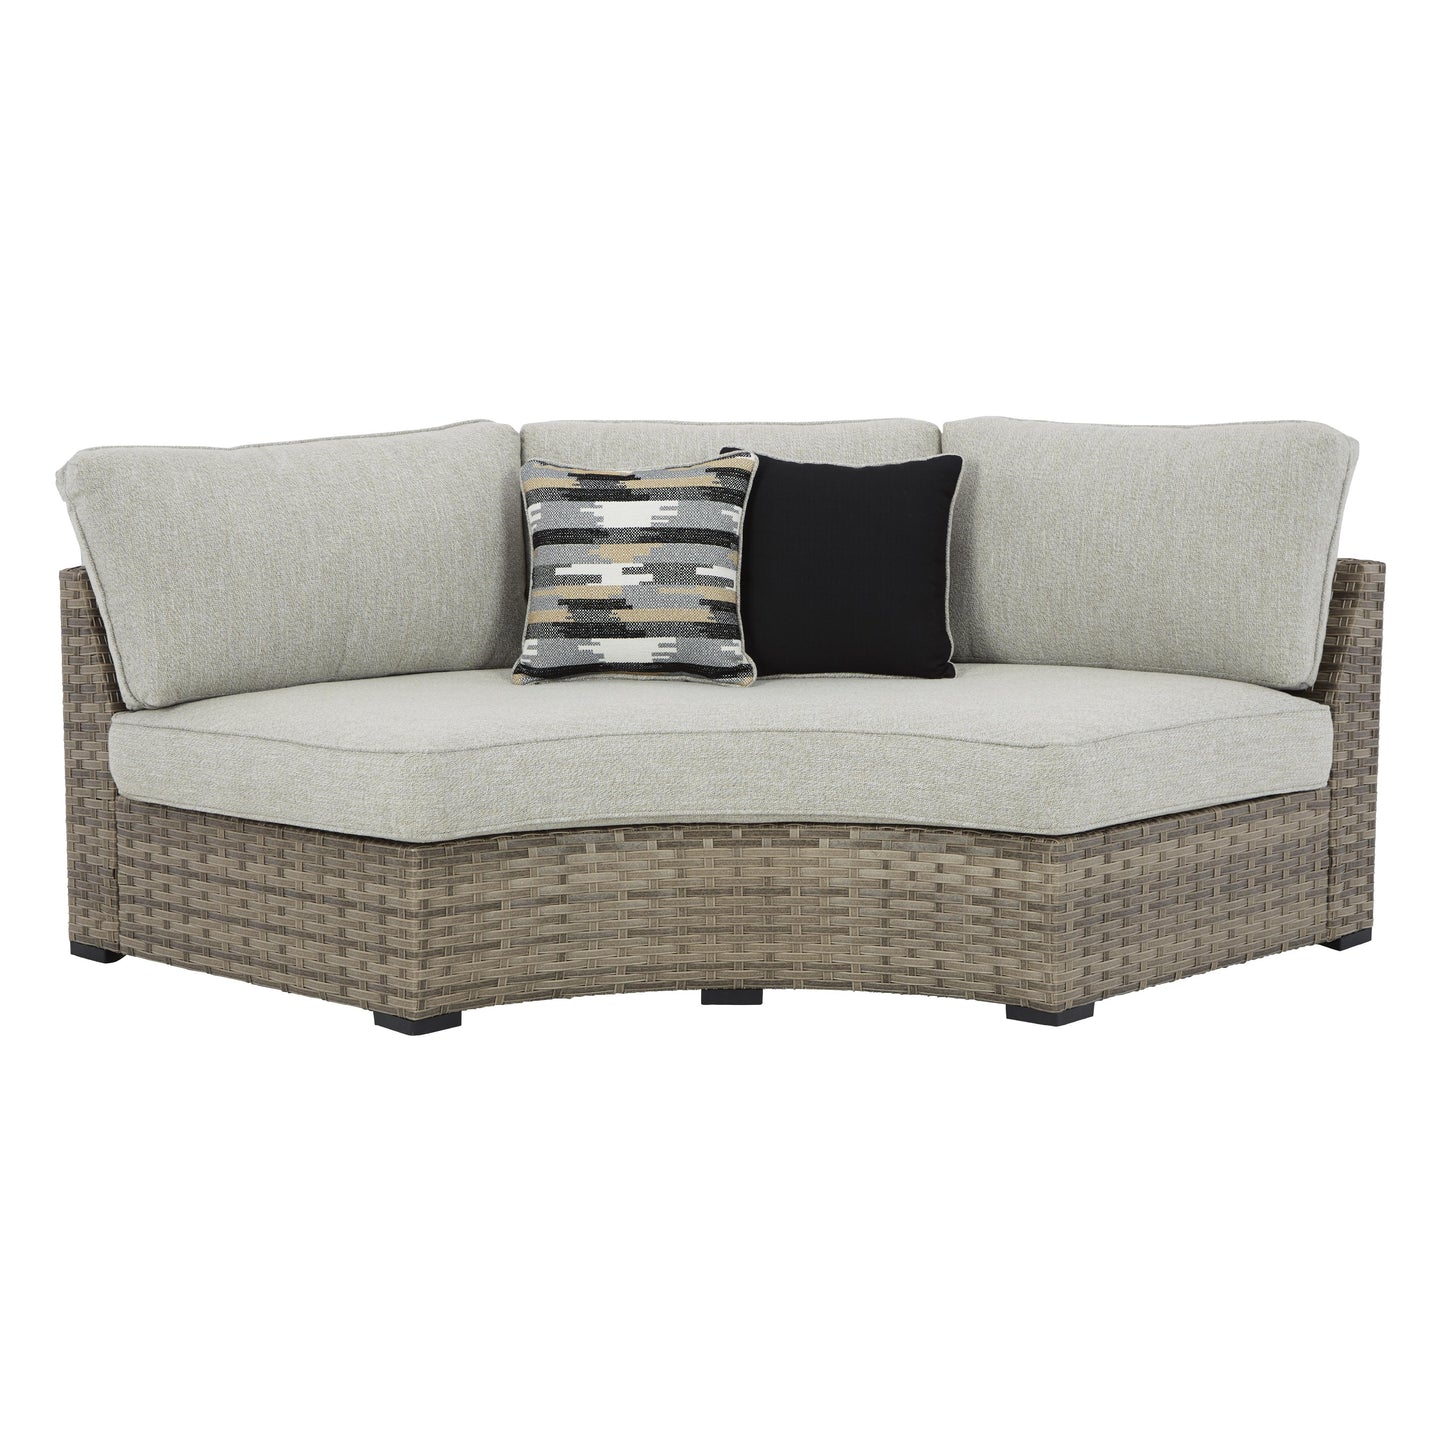 Signature Design by Ashley Outdoor Seating Loveseats P458-861 IMAGE 1